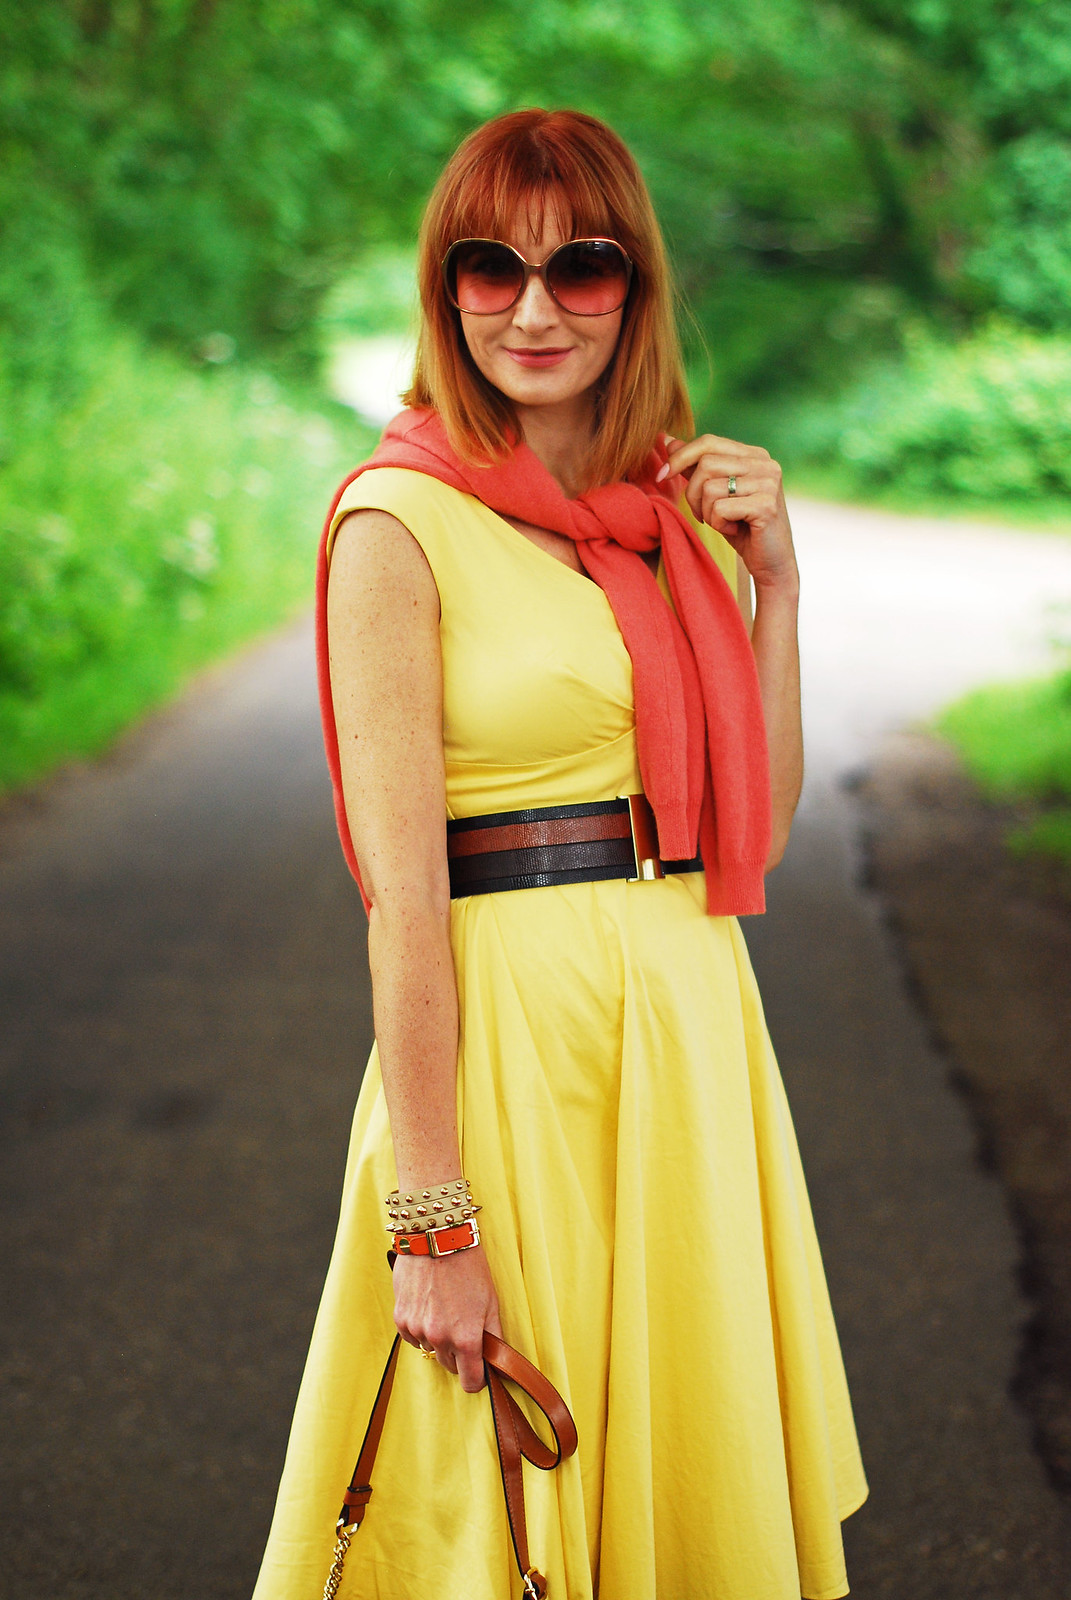 Summer style: Yellow sun dress with orange and coral | Not Dressed As Lamb